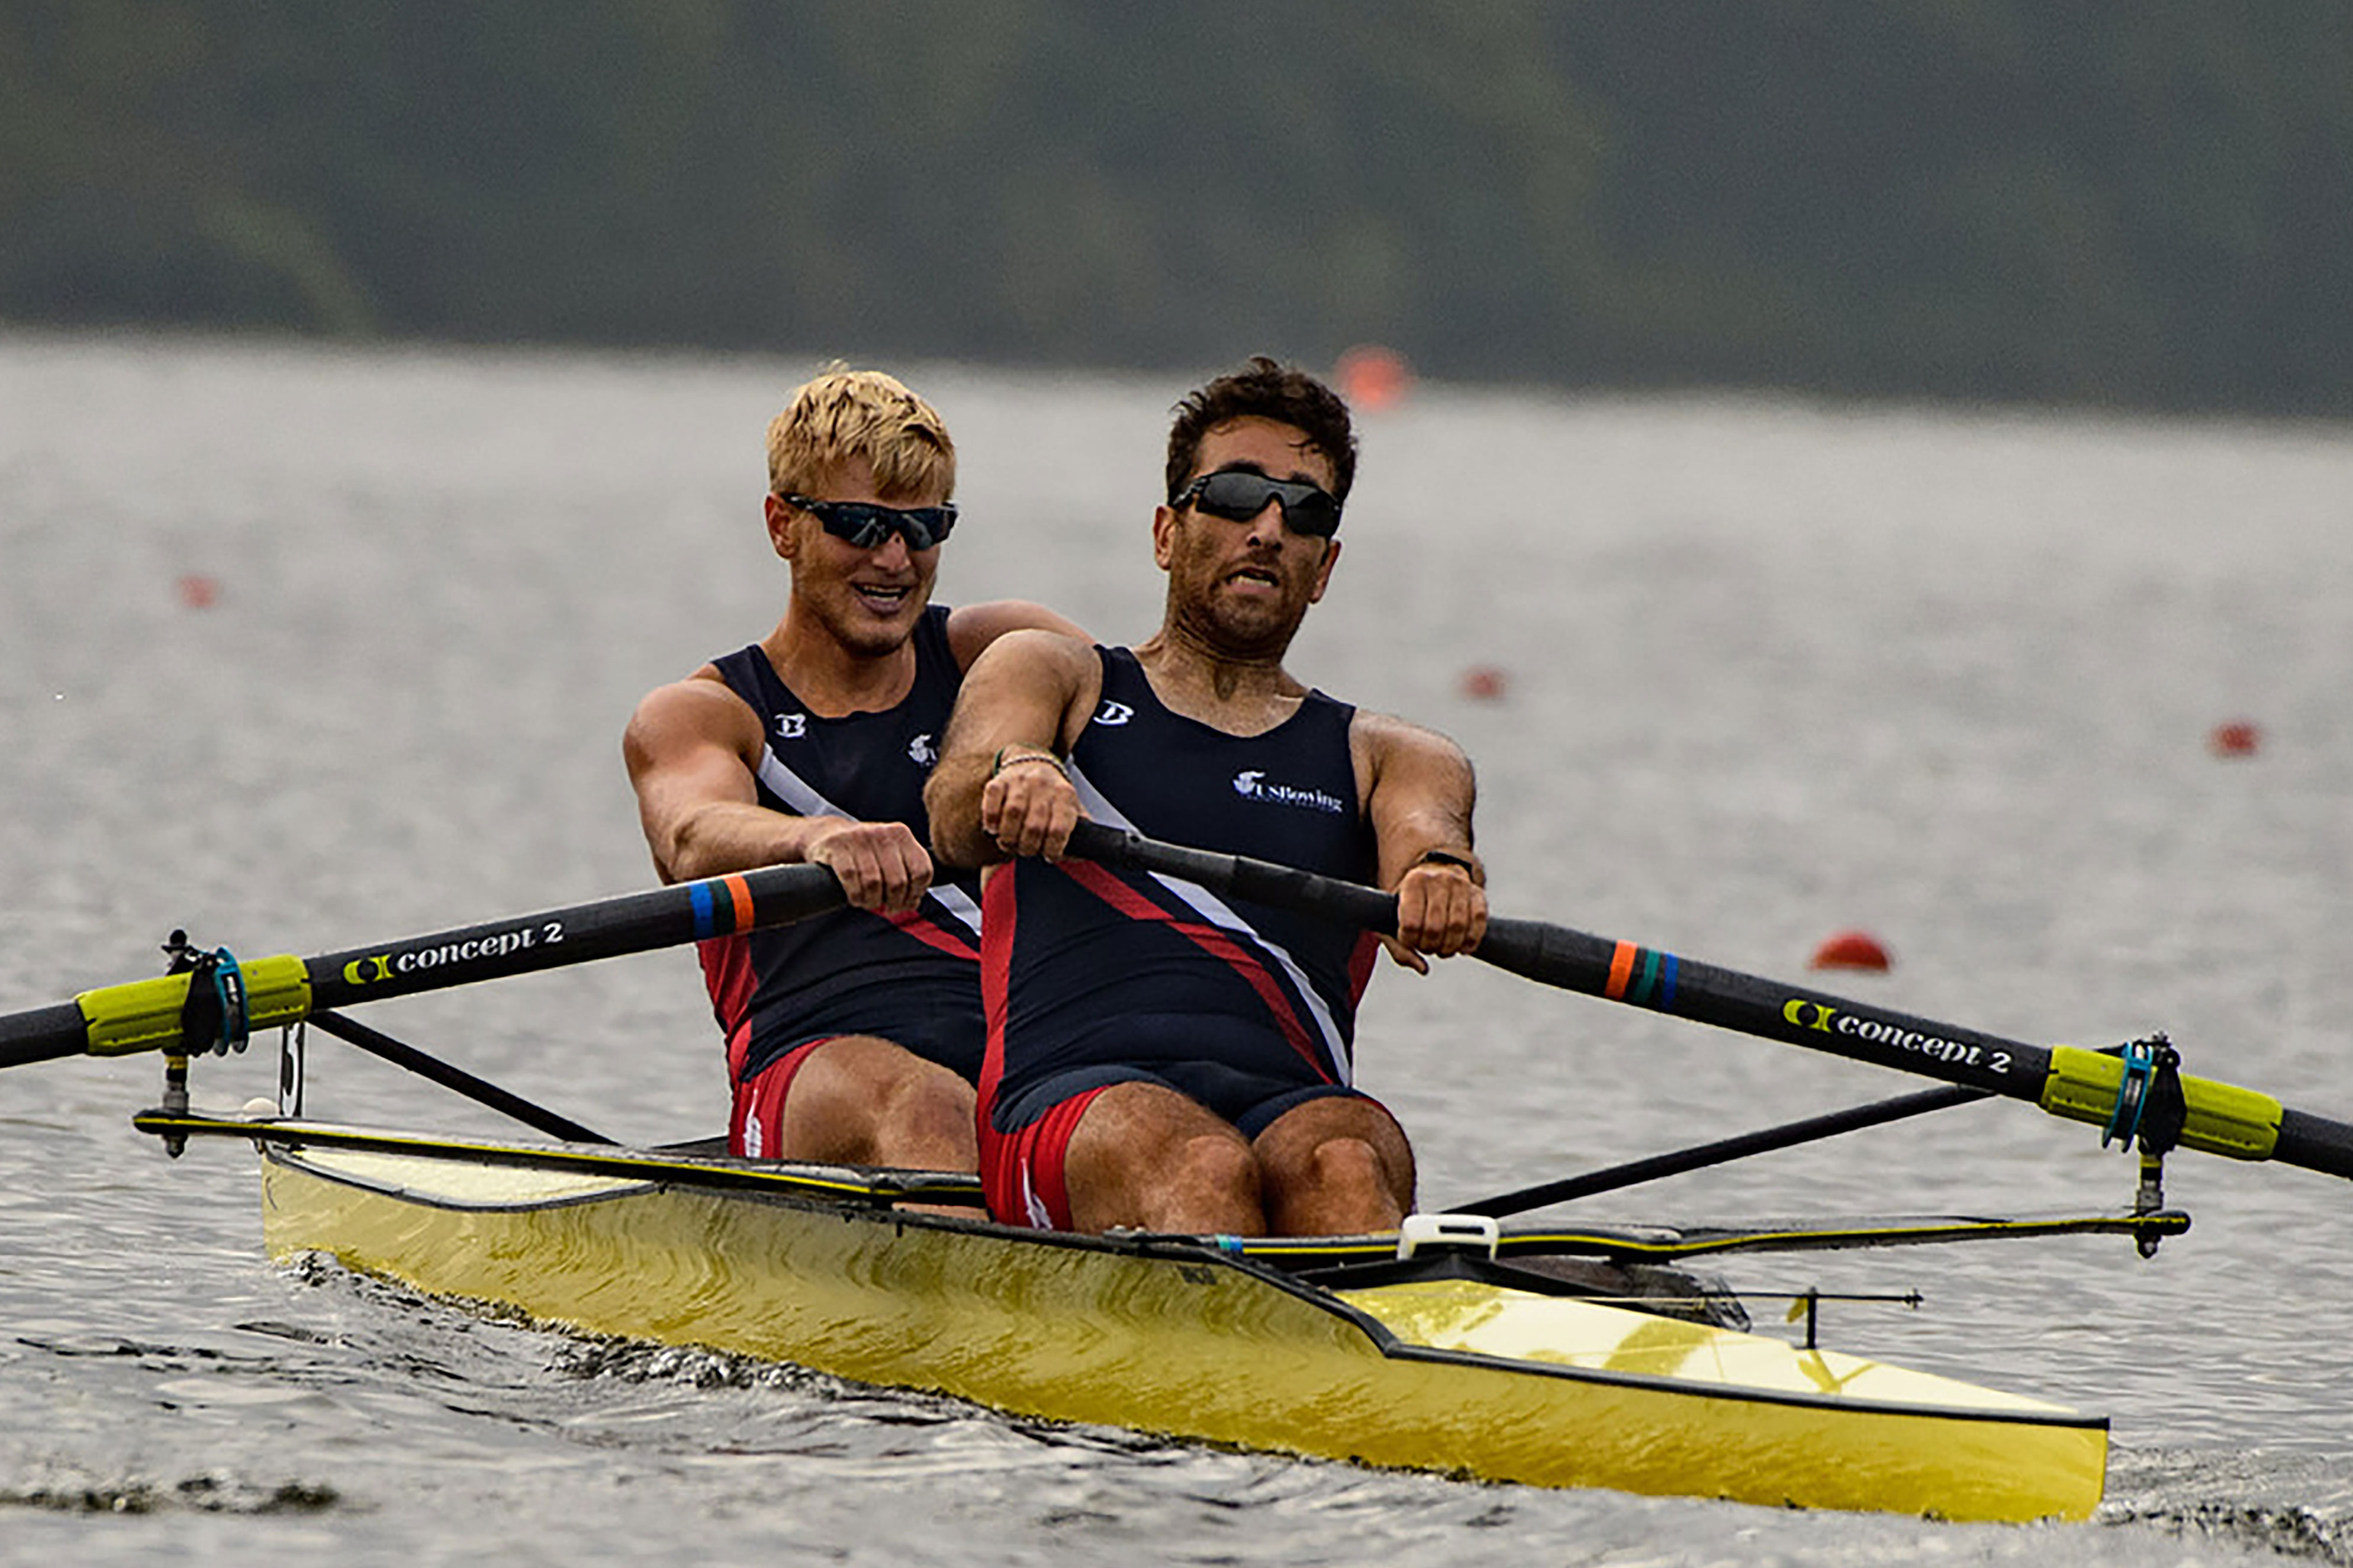 Anders Weiss (left) and Nareg Guregian (right) compete at the U.S. Olympic trials for pairs rowing at Princeton on June 22, 2016. (U.S. Rowing)